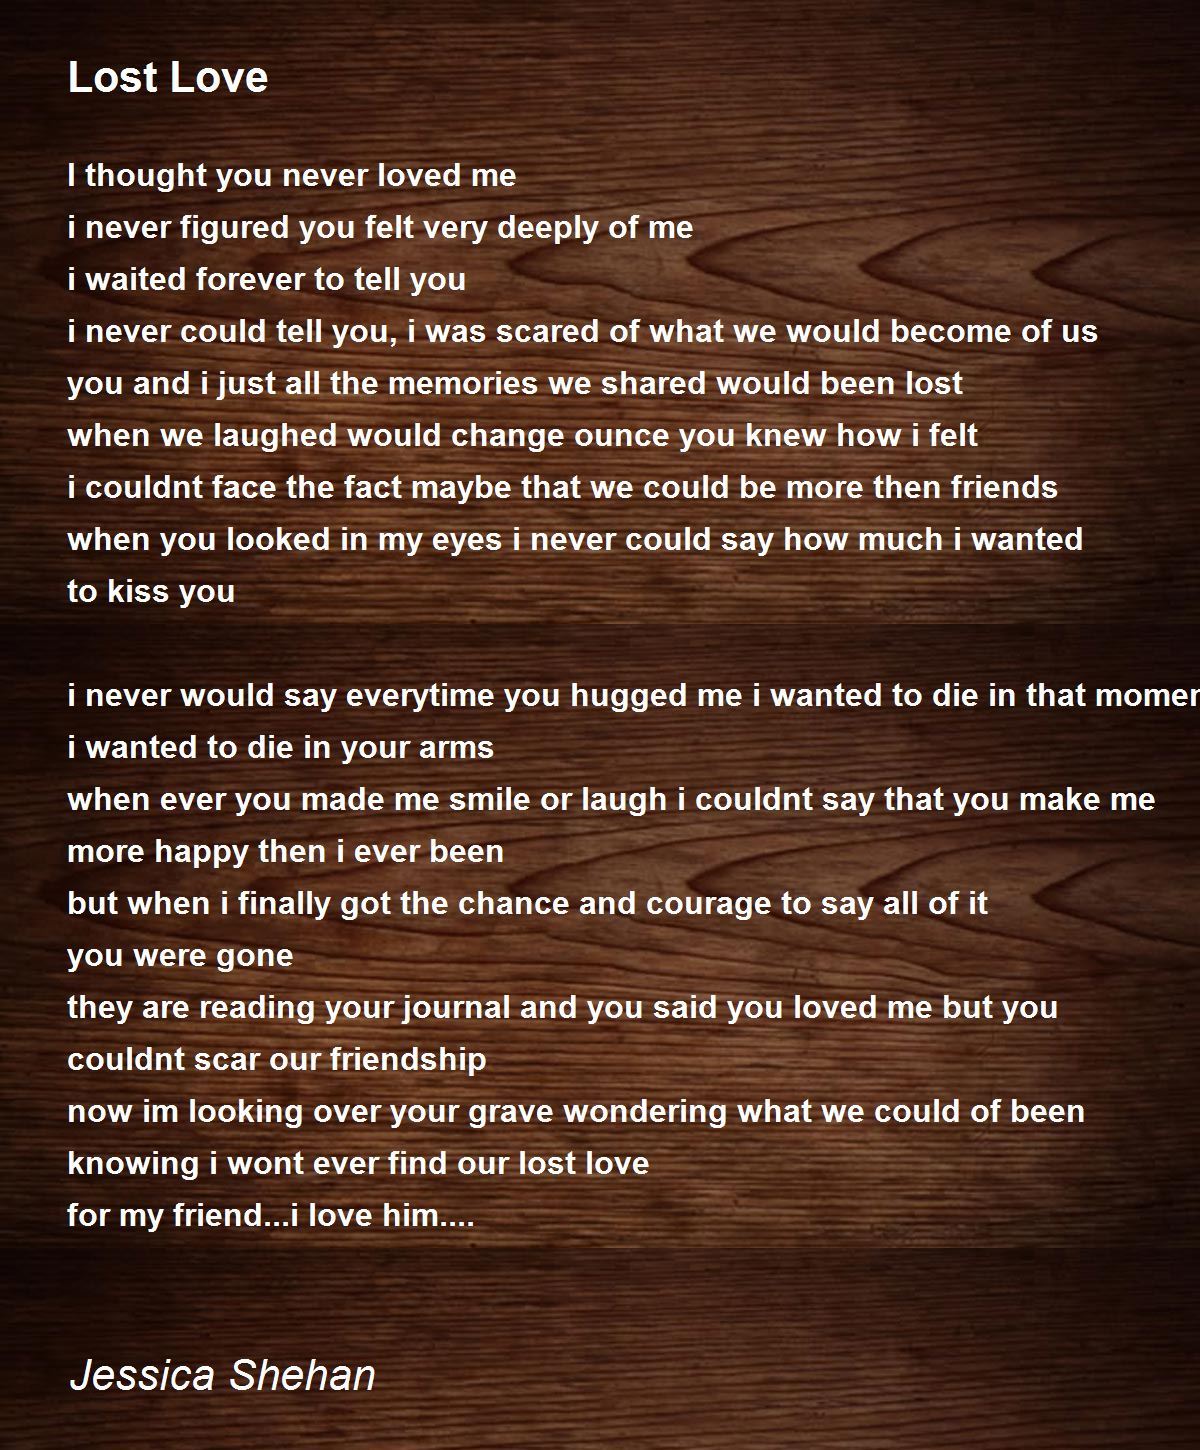 Lost Love - Lost Love Poem by Jessica Shehan